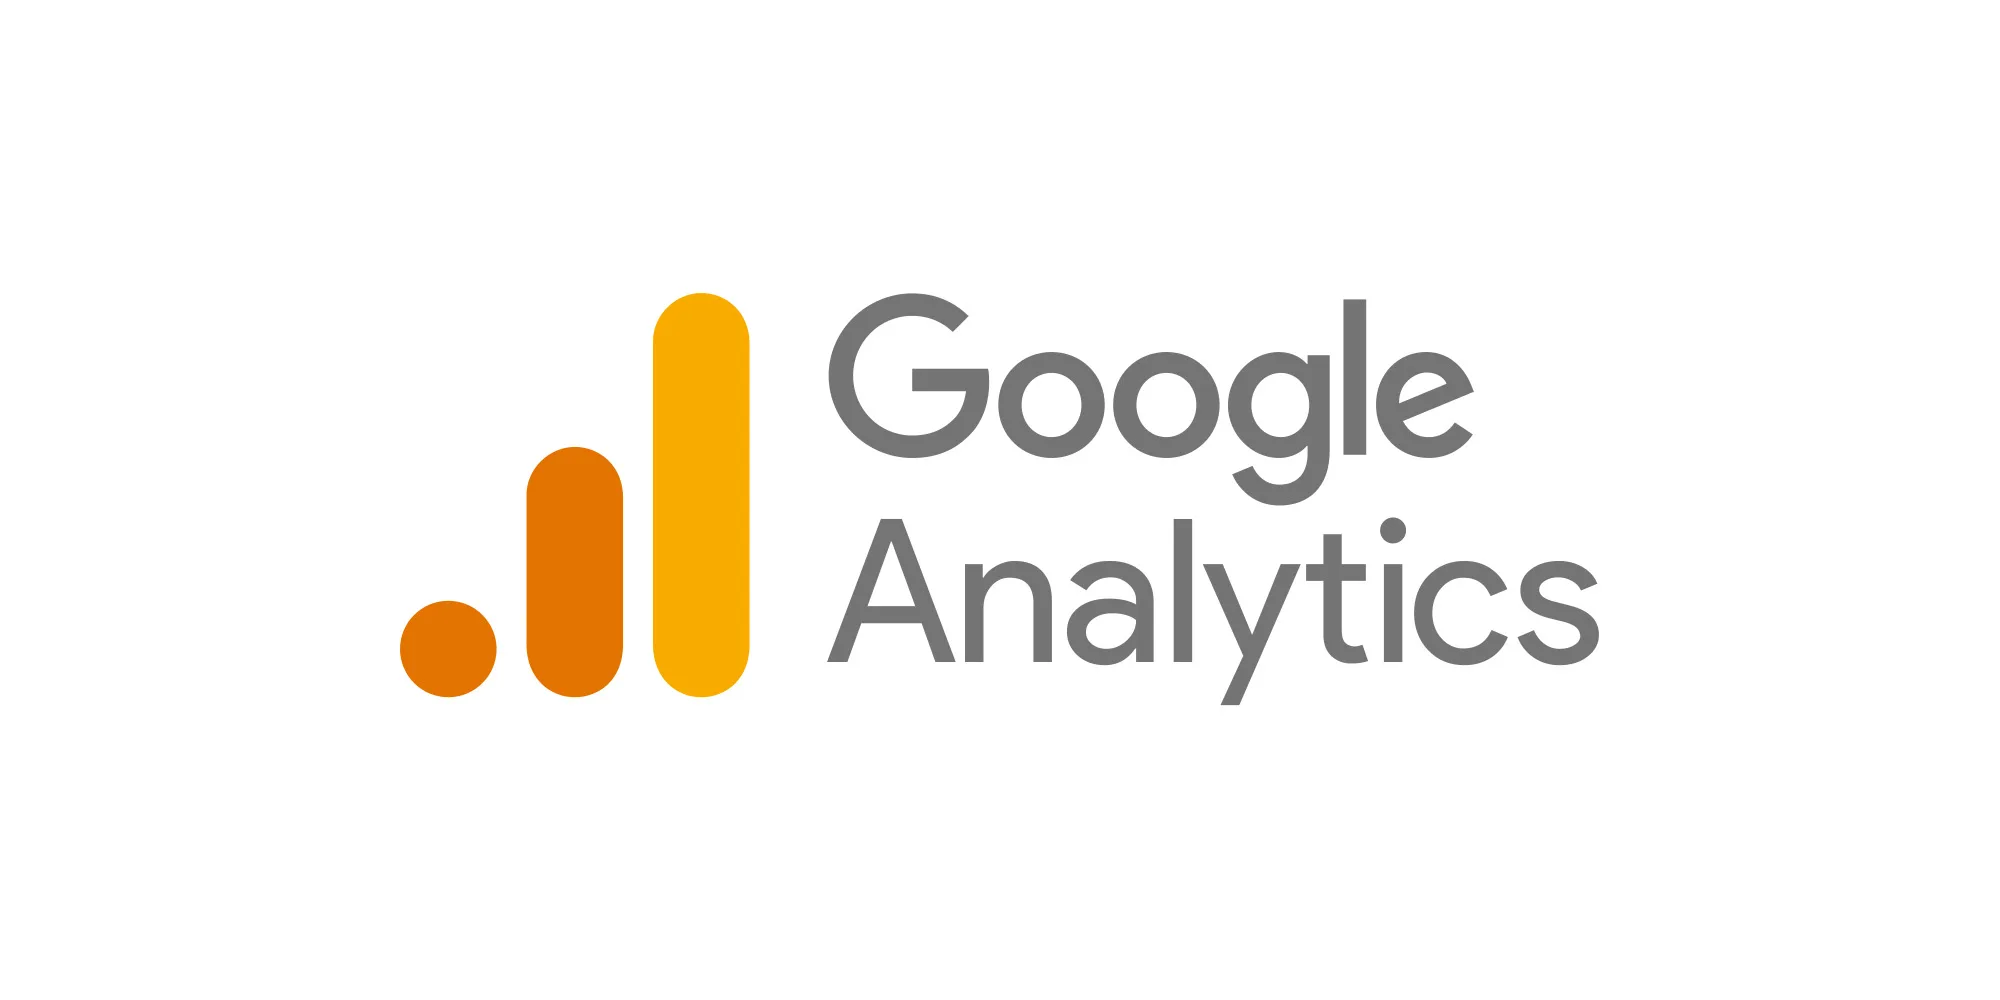 How to Setup Google Analytics on Your Website?